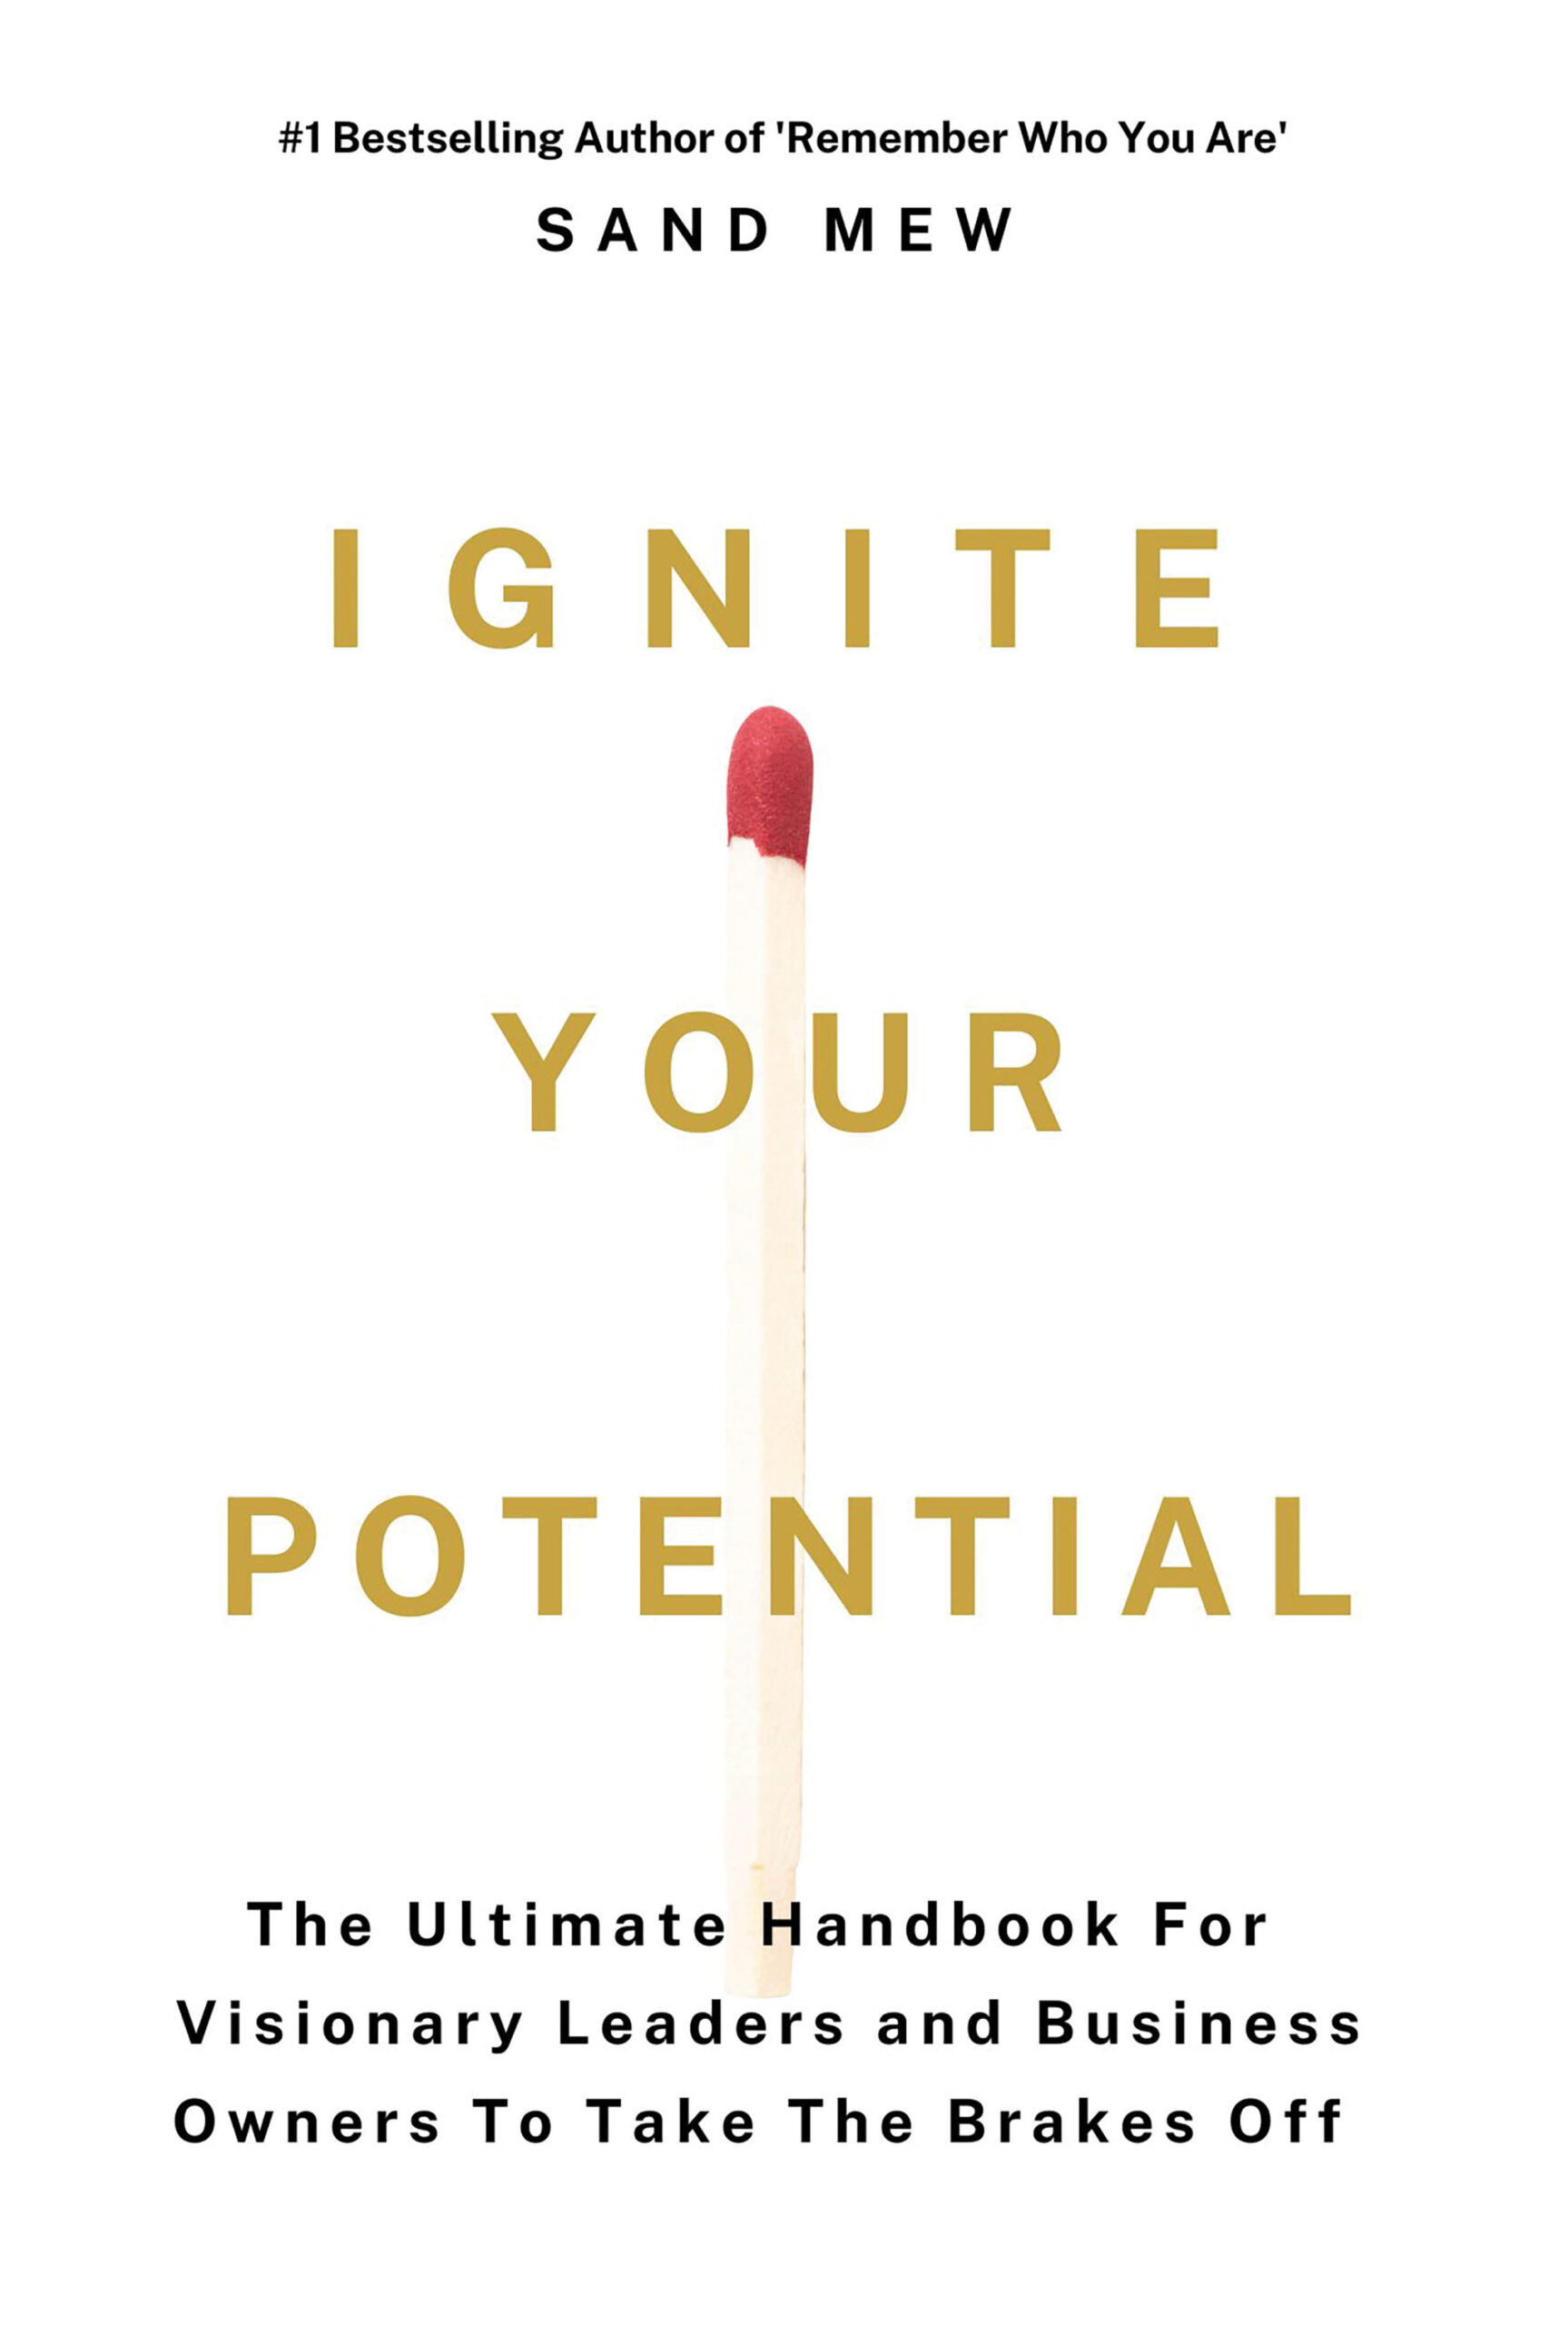 IGNITE YOUR POTENTIAL